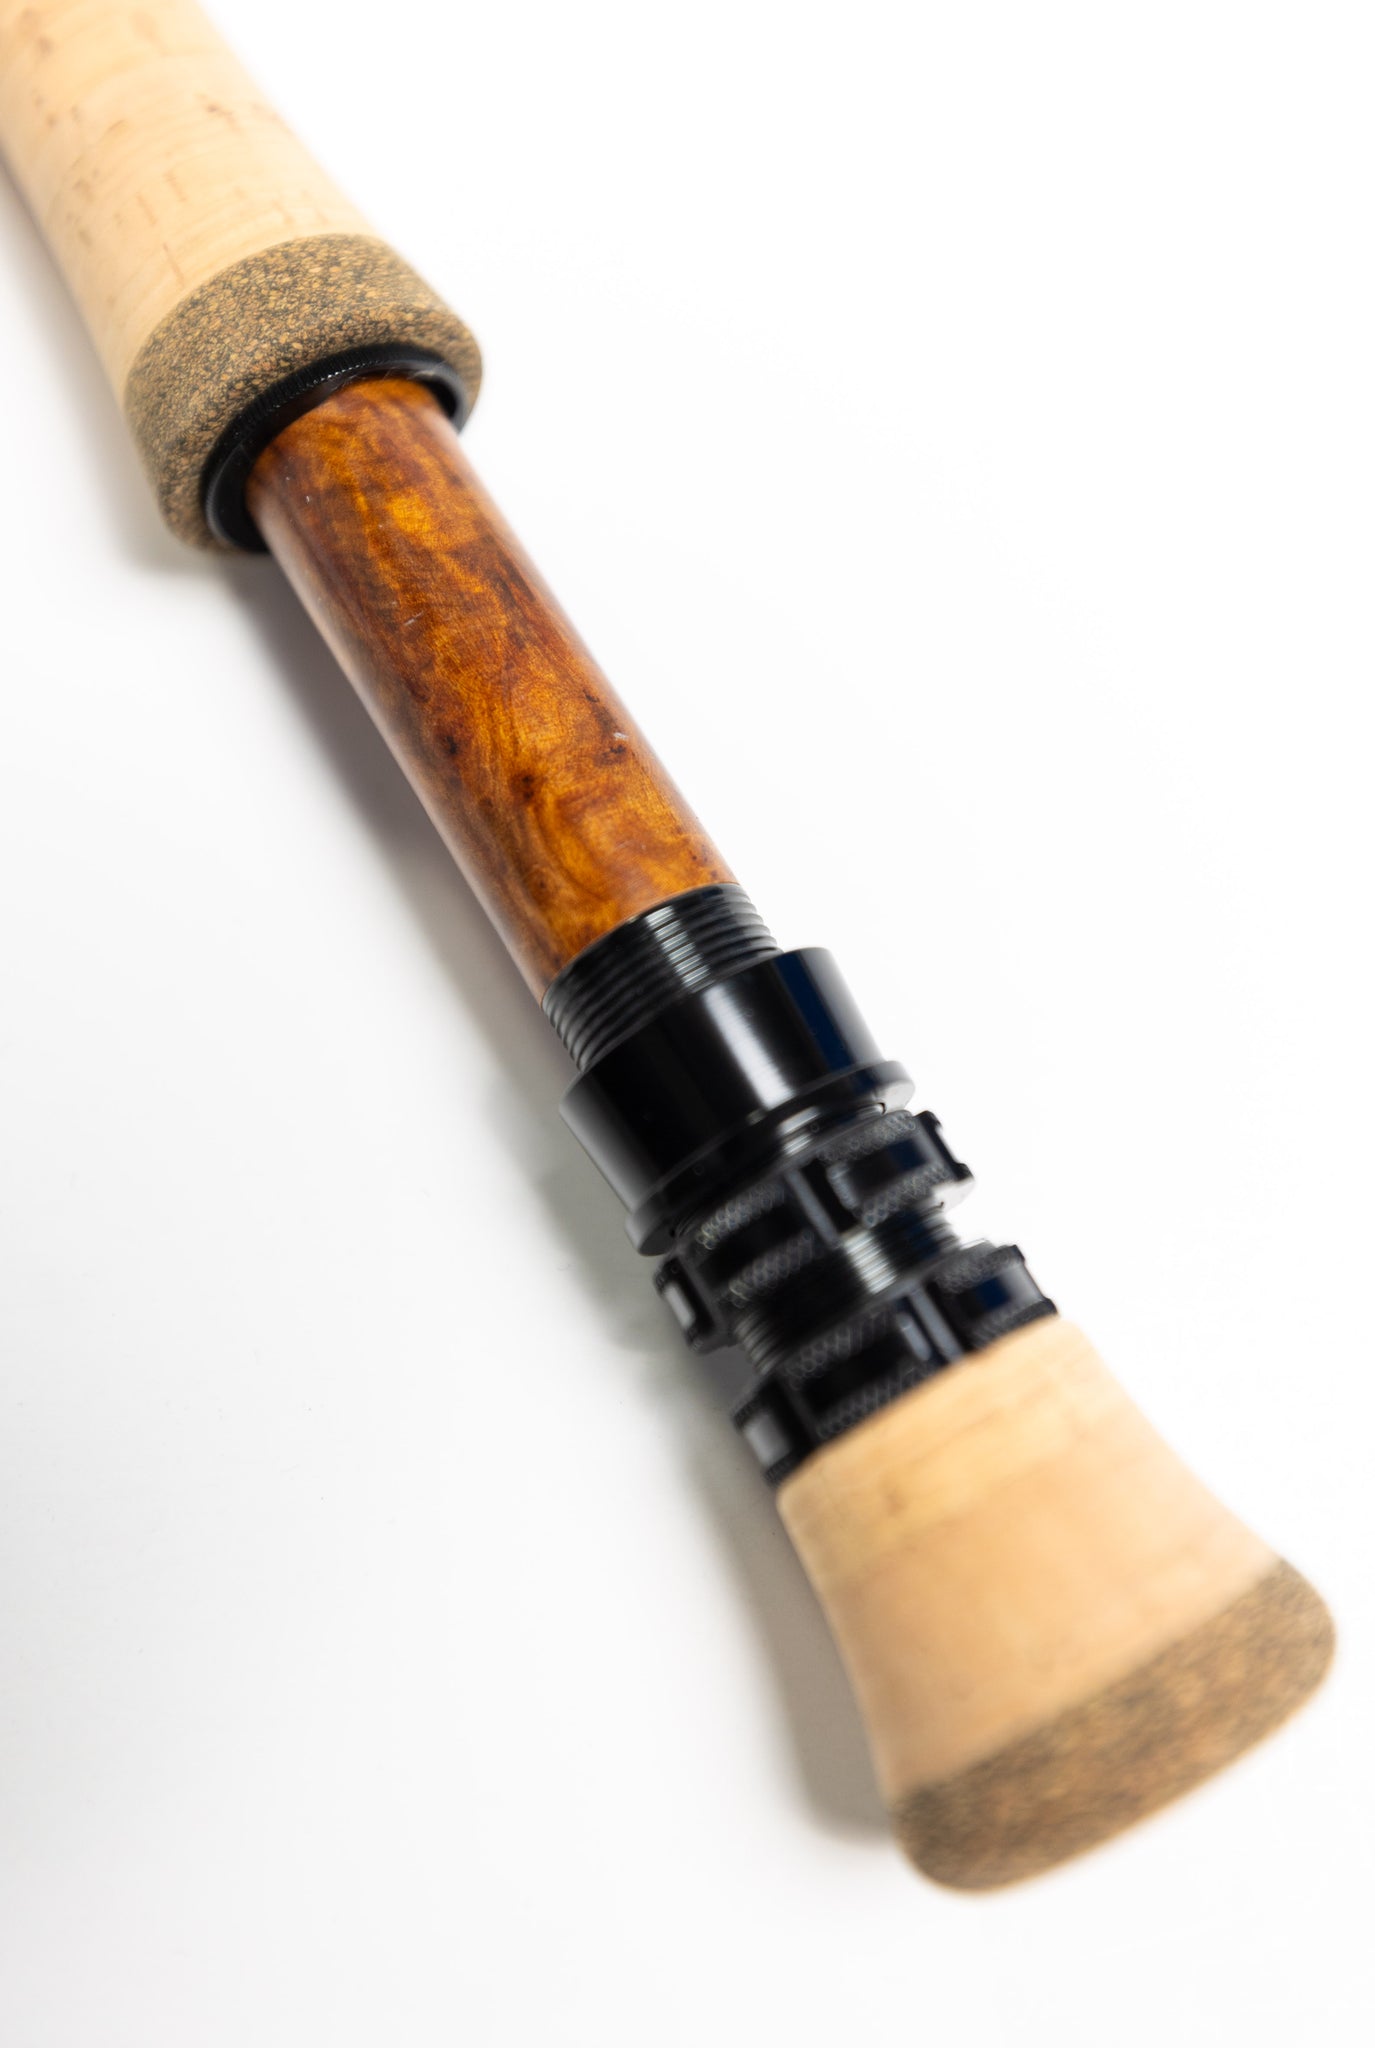 Midnight Special II -  9wt - 9'  - Veined Timber